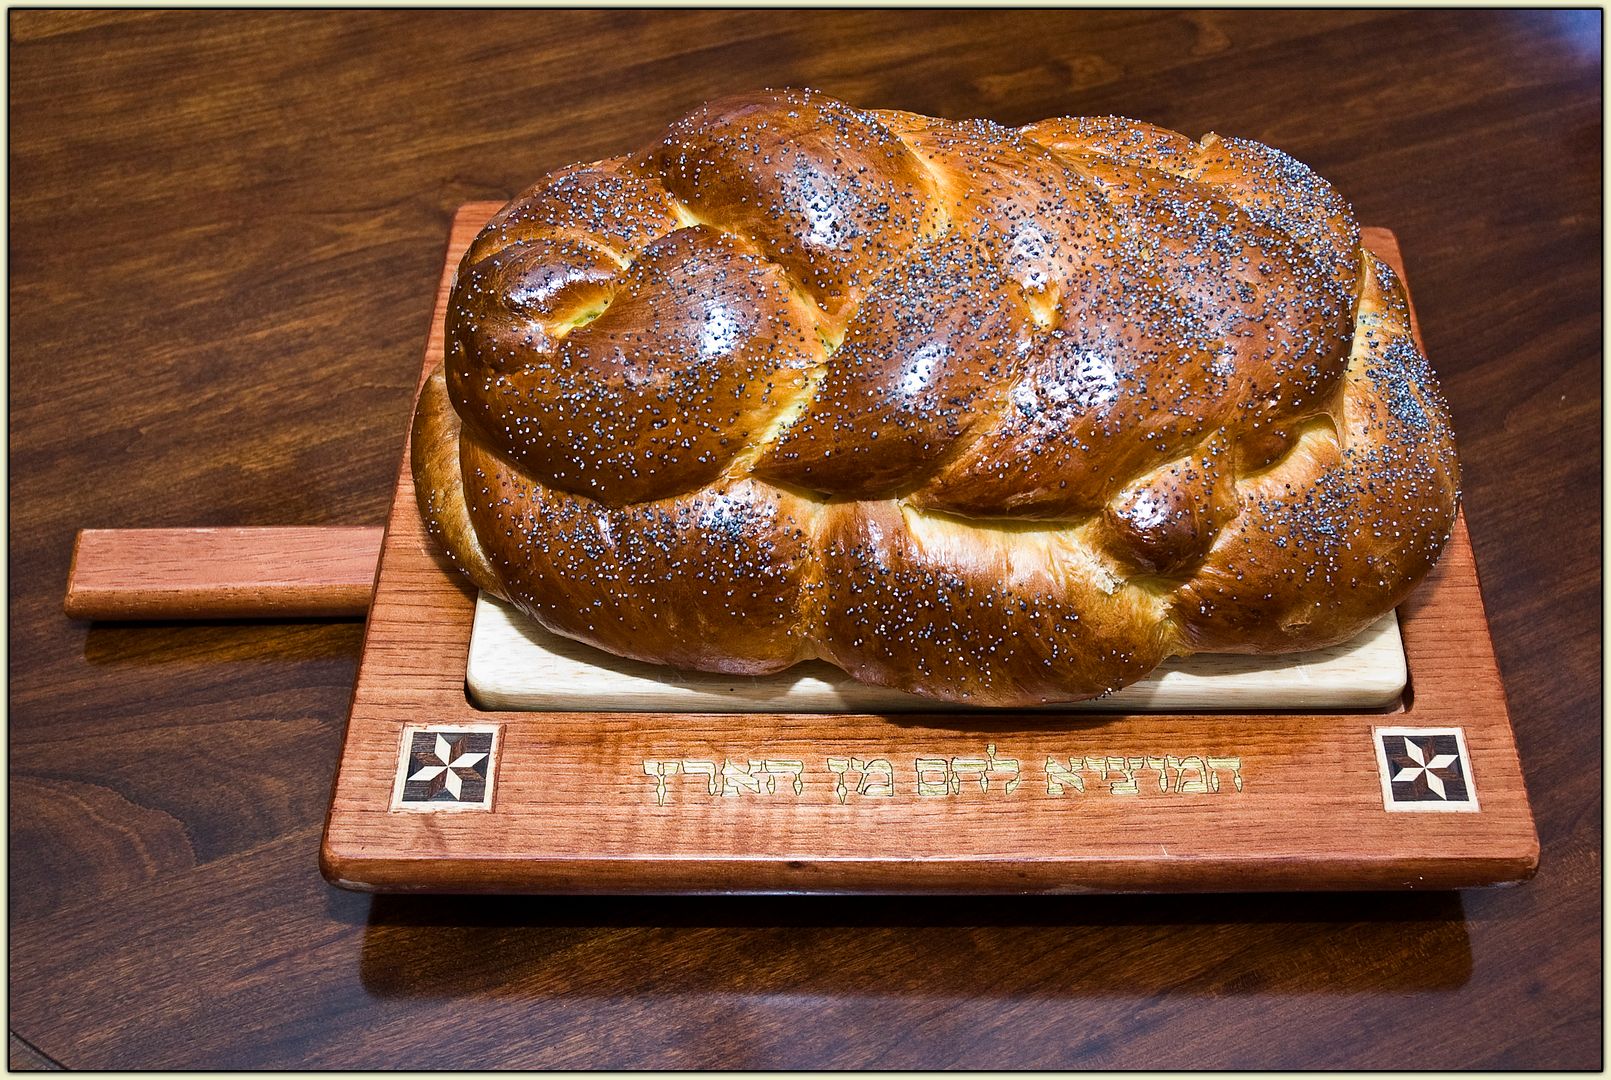 The Challah of March 9, 2012